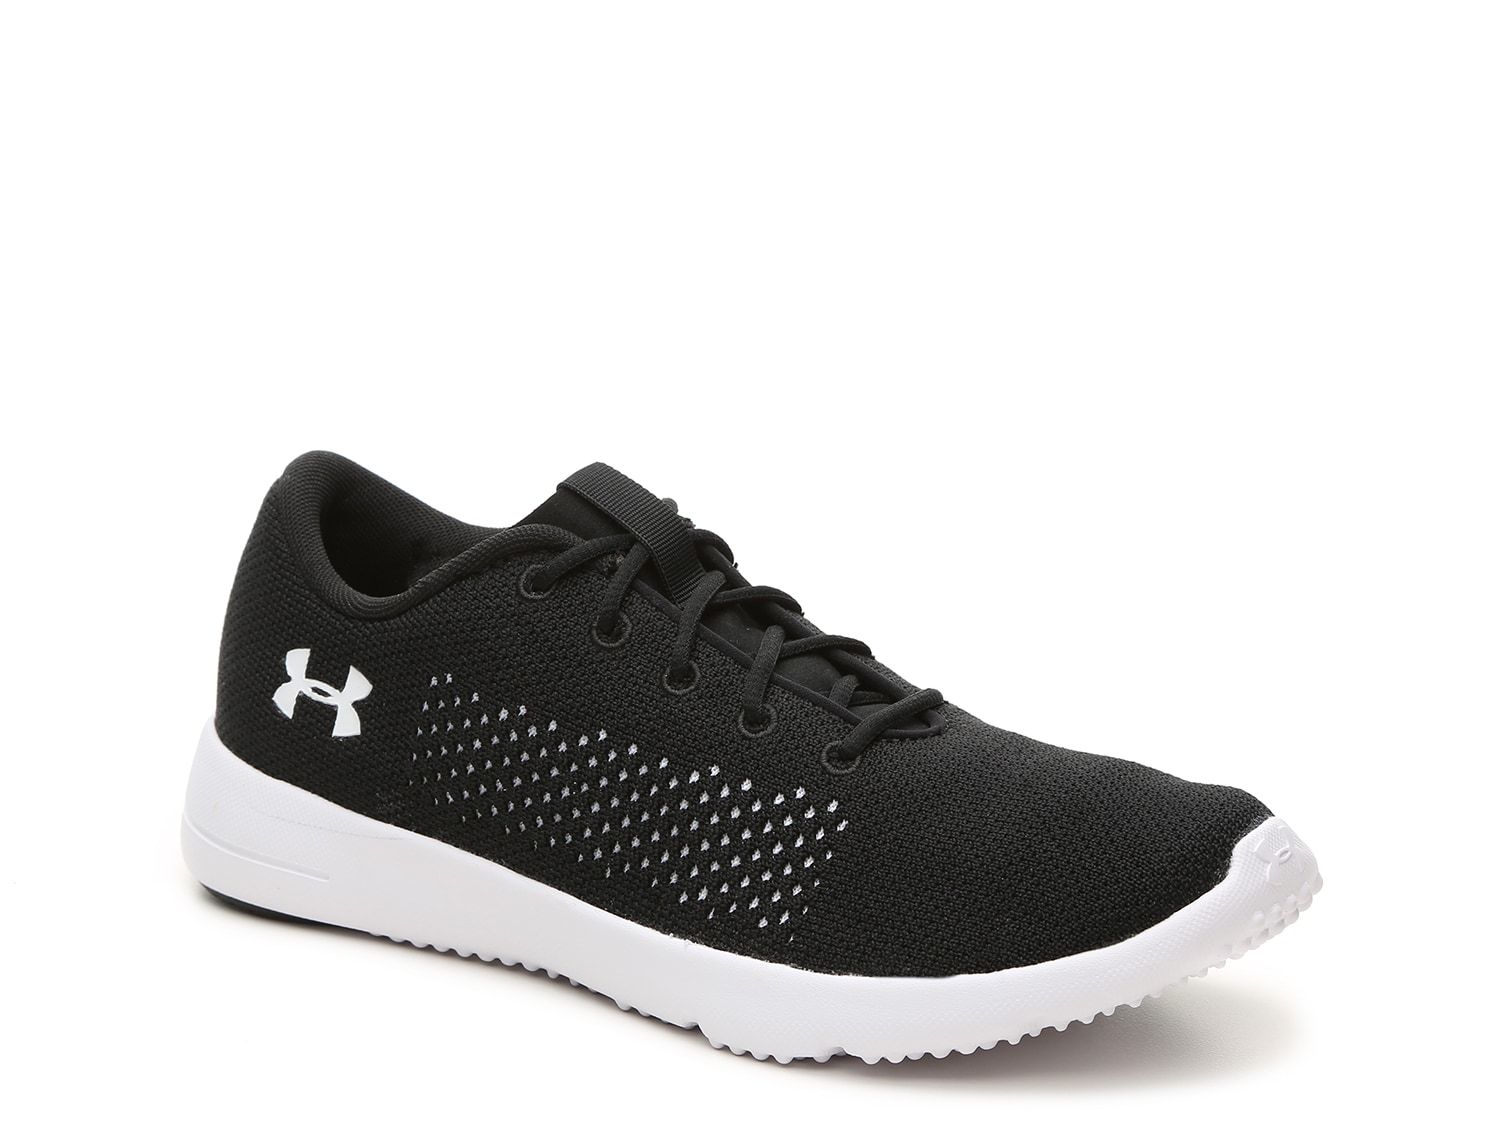 under armour rapid running shoes review